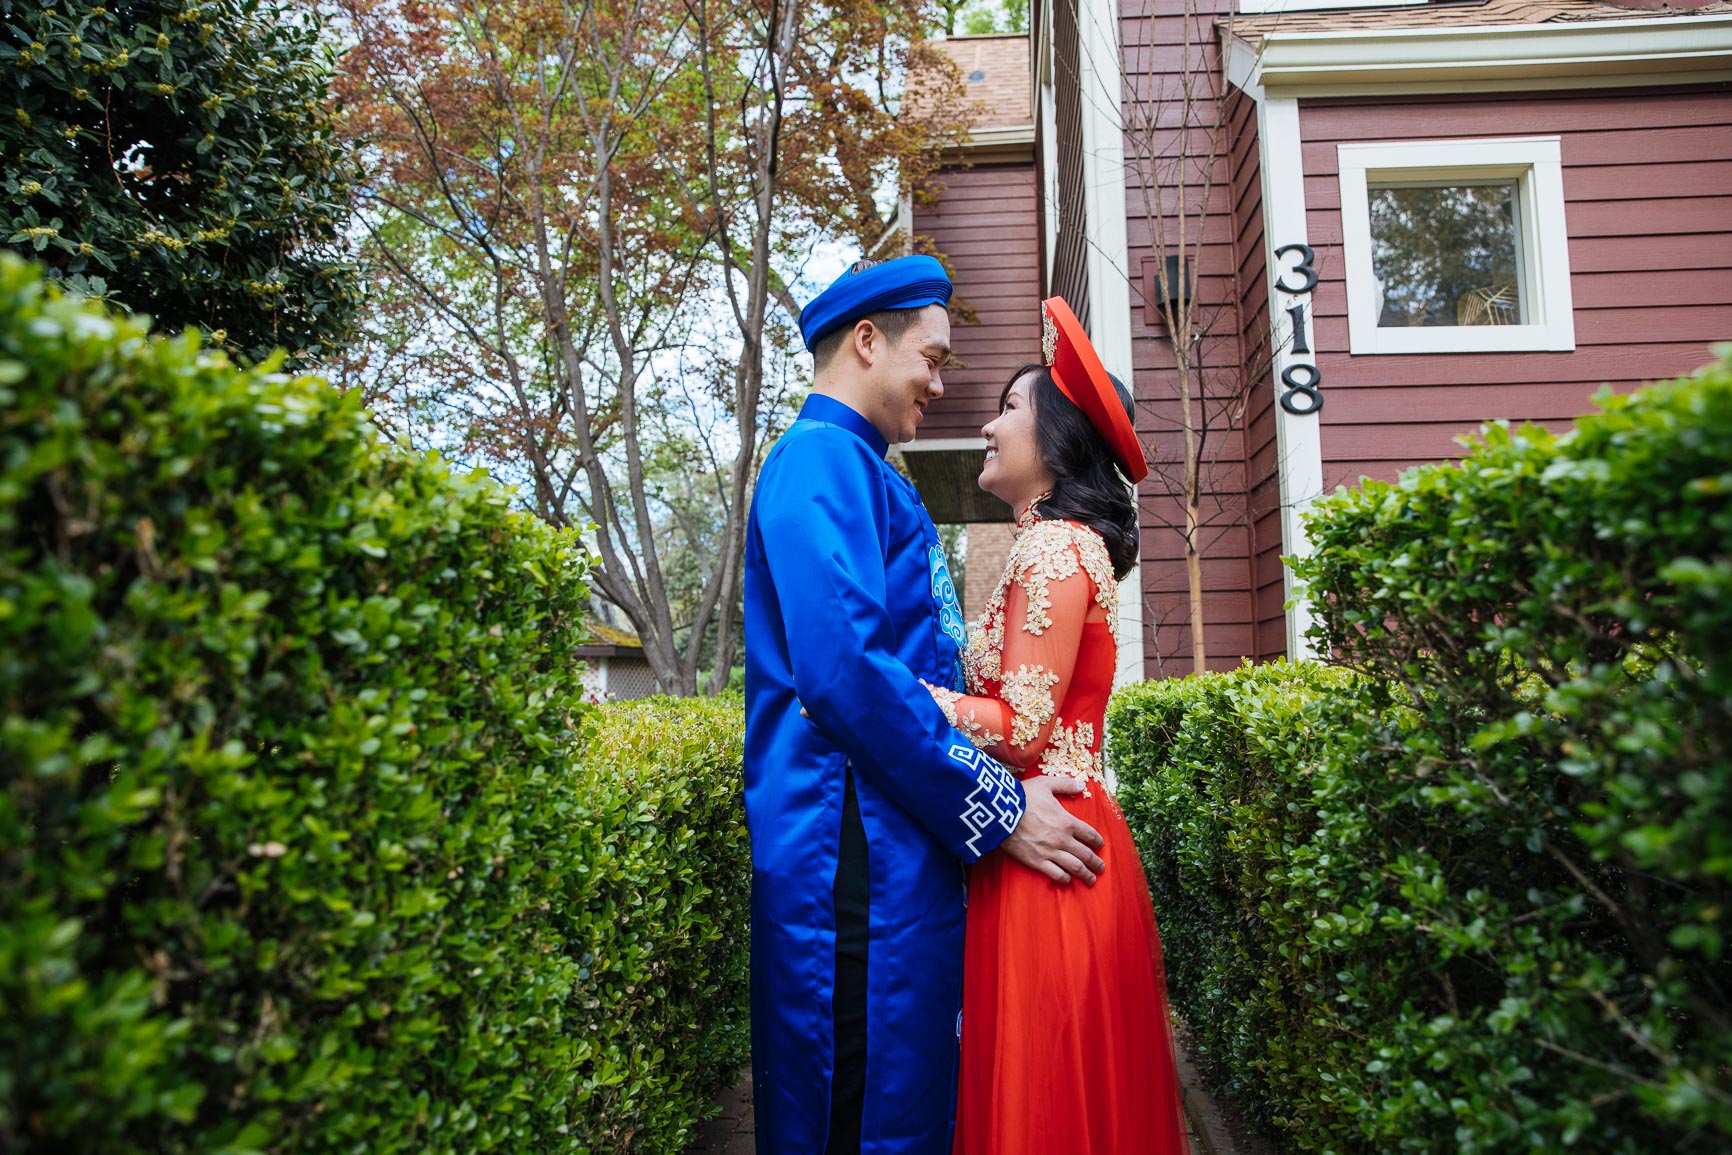 Charlotte Fourth Ward district engagement session shot by Nhieu Tang Photography | nhieutang.com